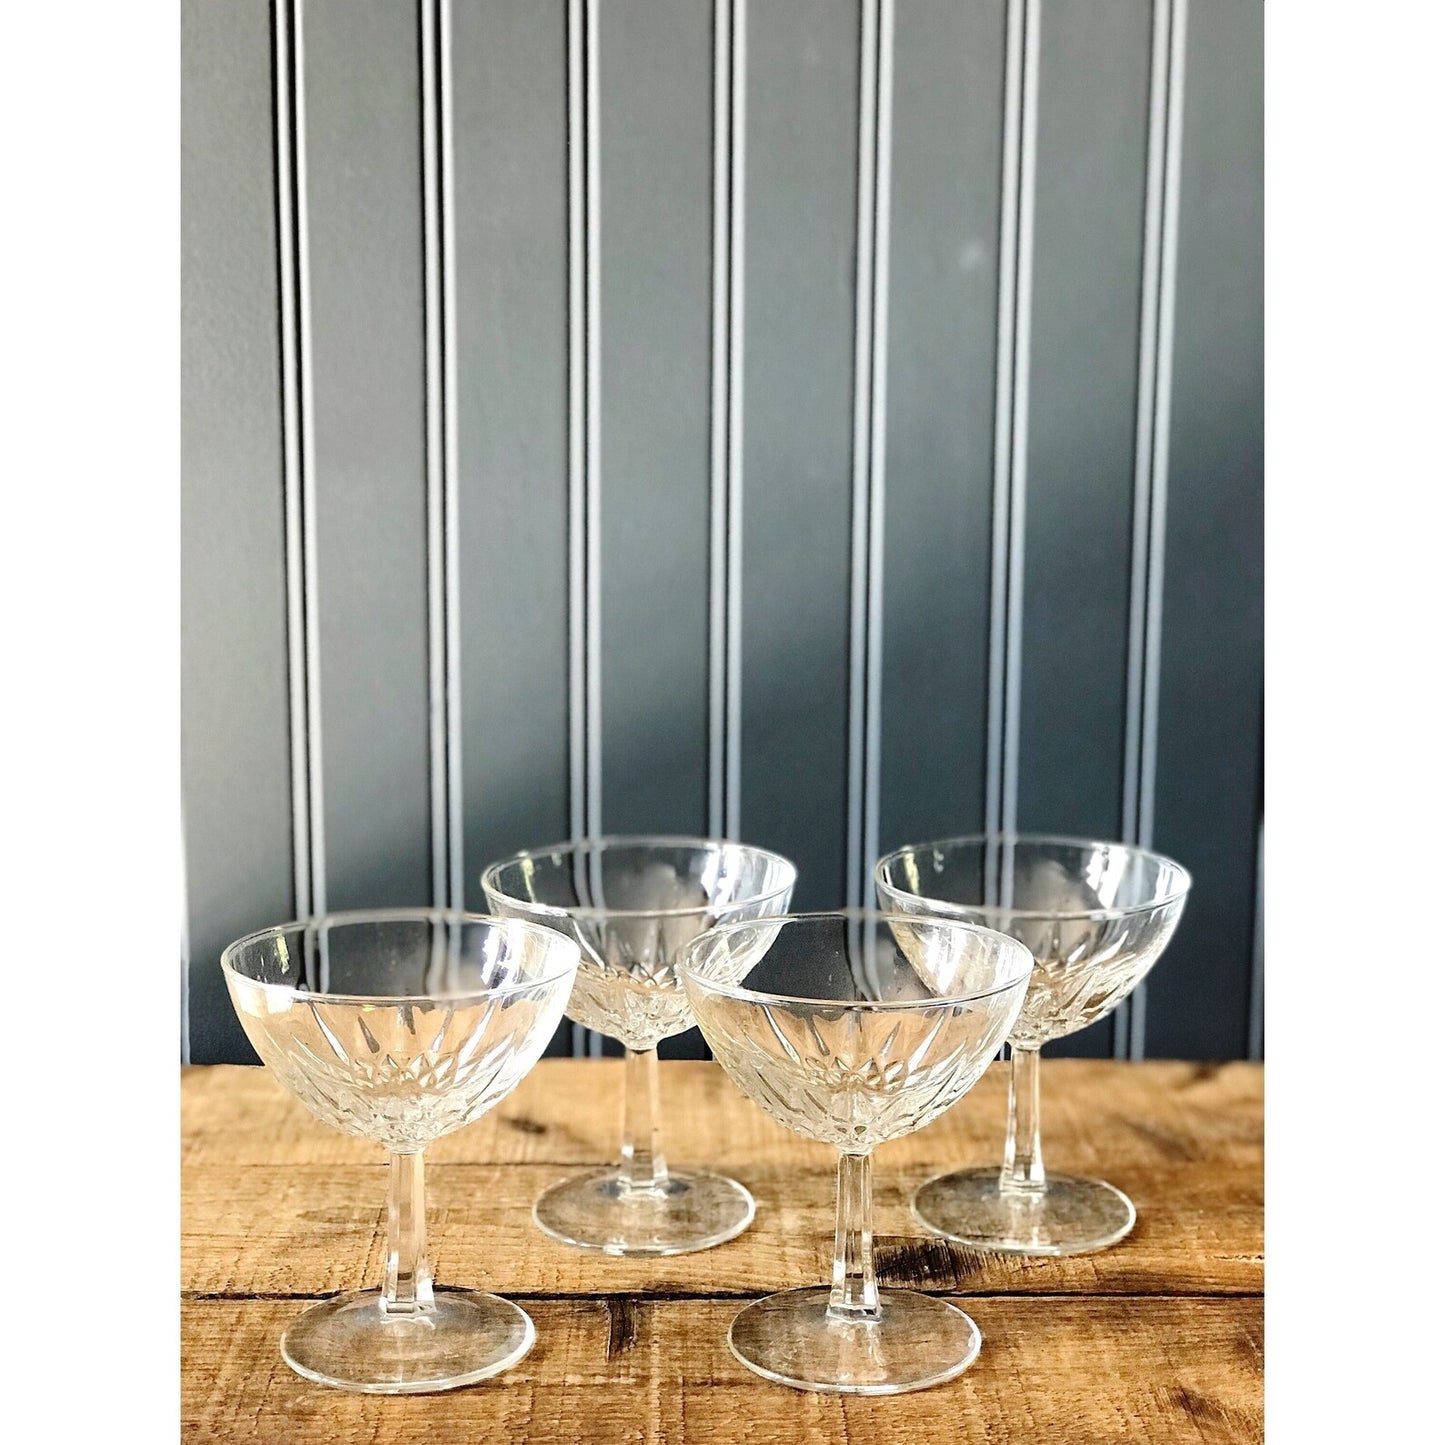 Set of 4 Vintage French Crystal Champagne Coupes with Beveled Stem